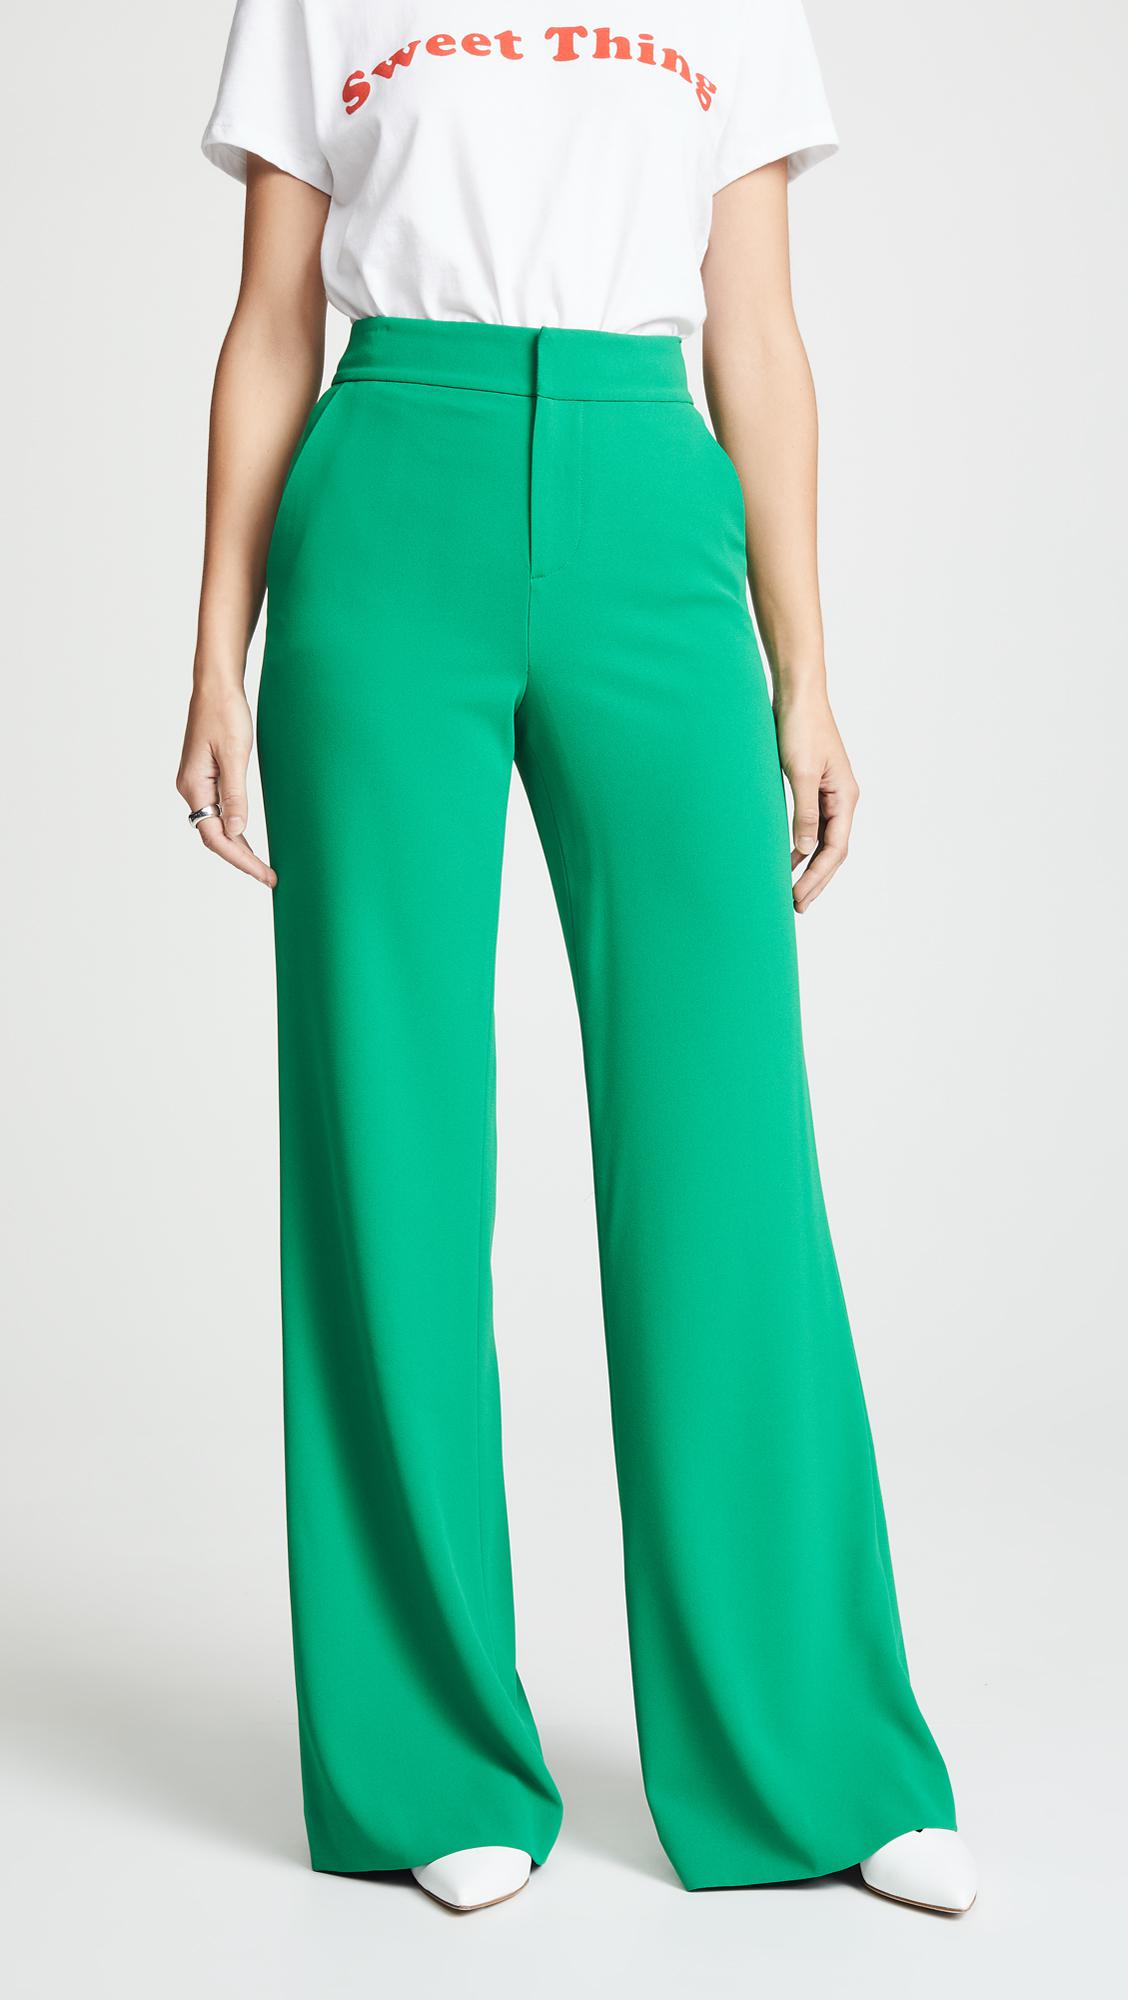 Lyst - Alice + Olivia Dylan High Waisted Clean Fit Pants in Green